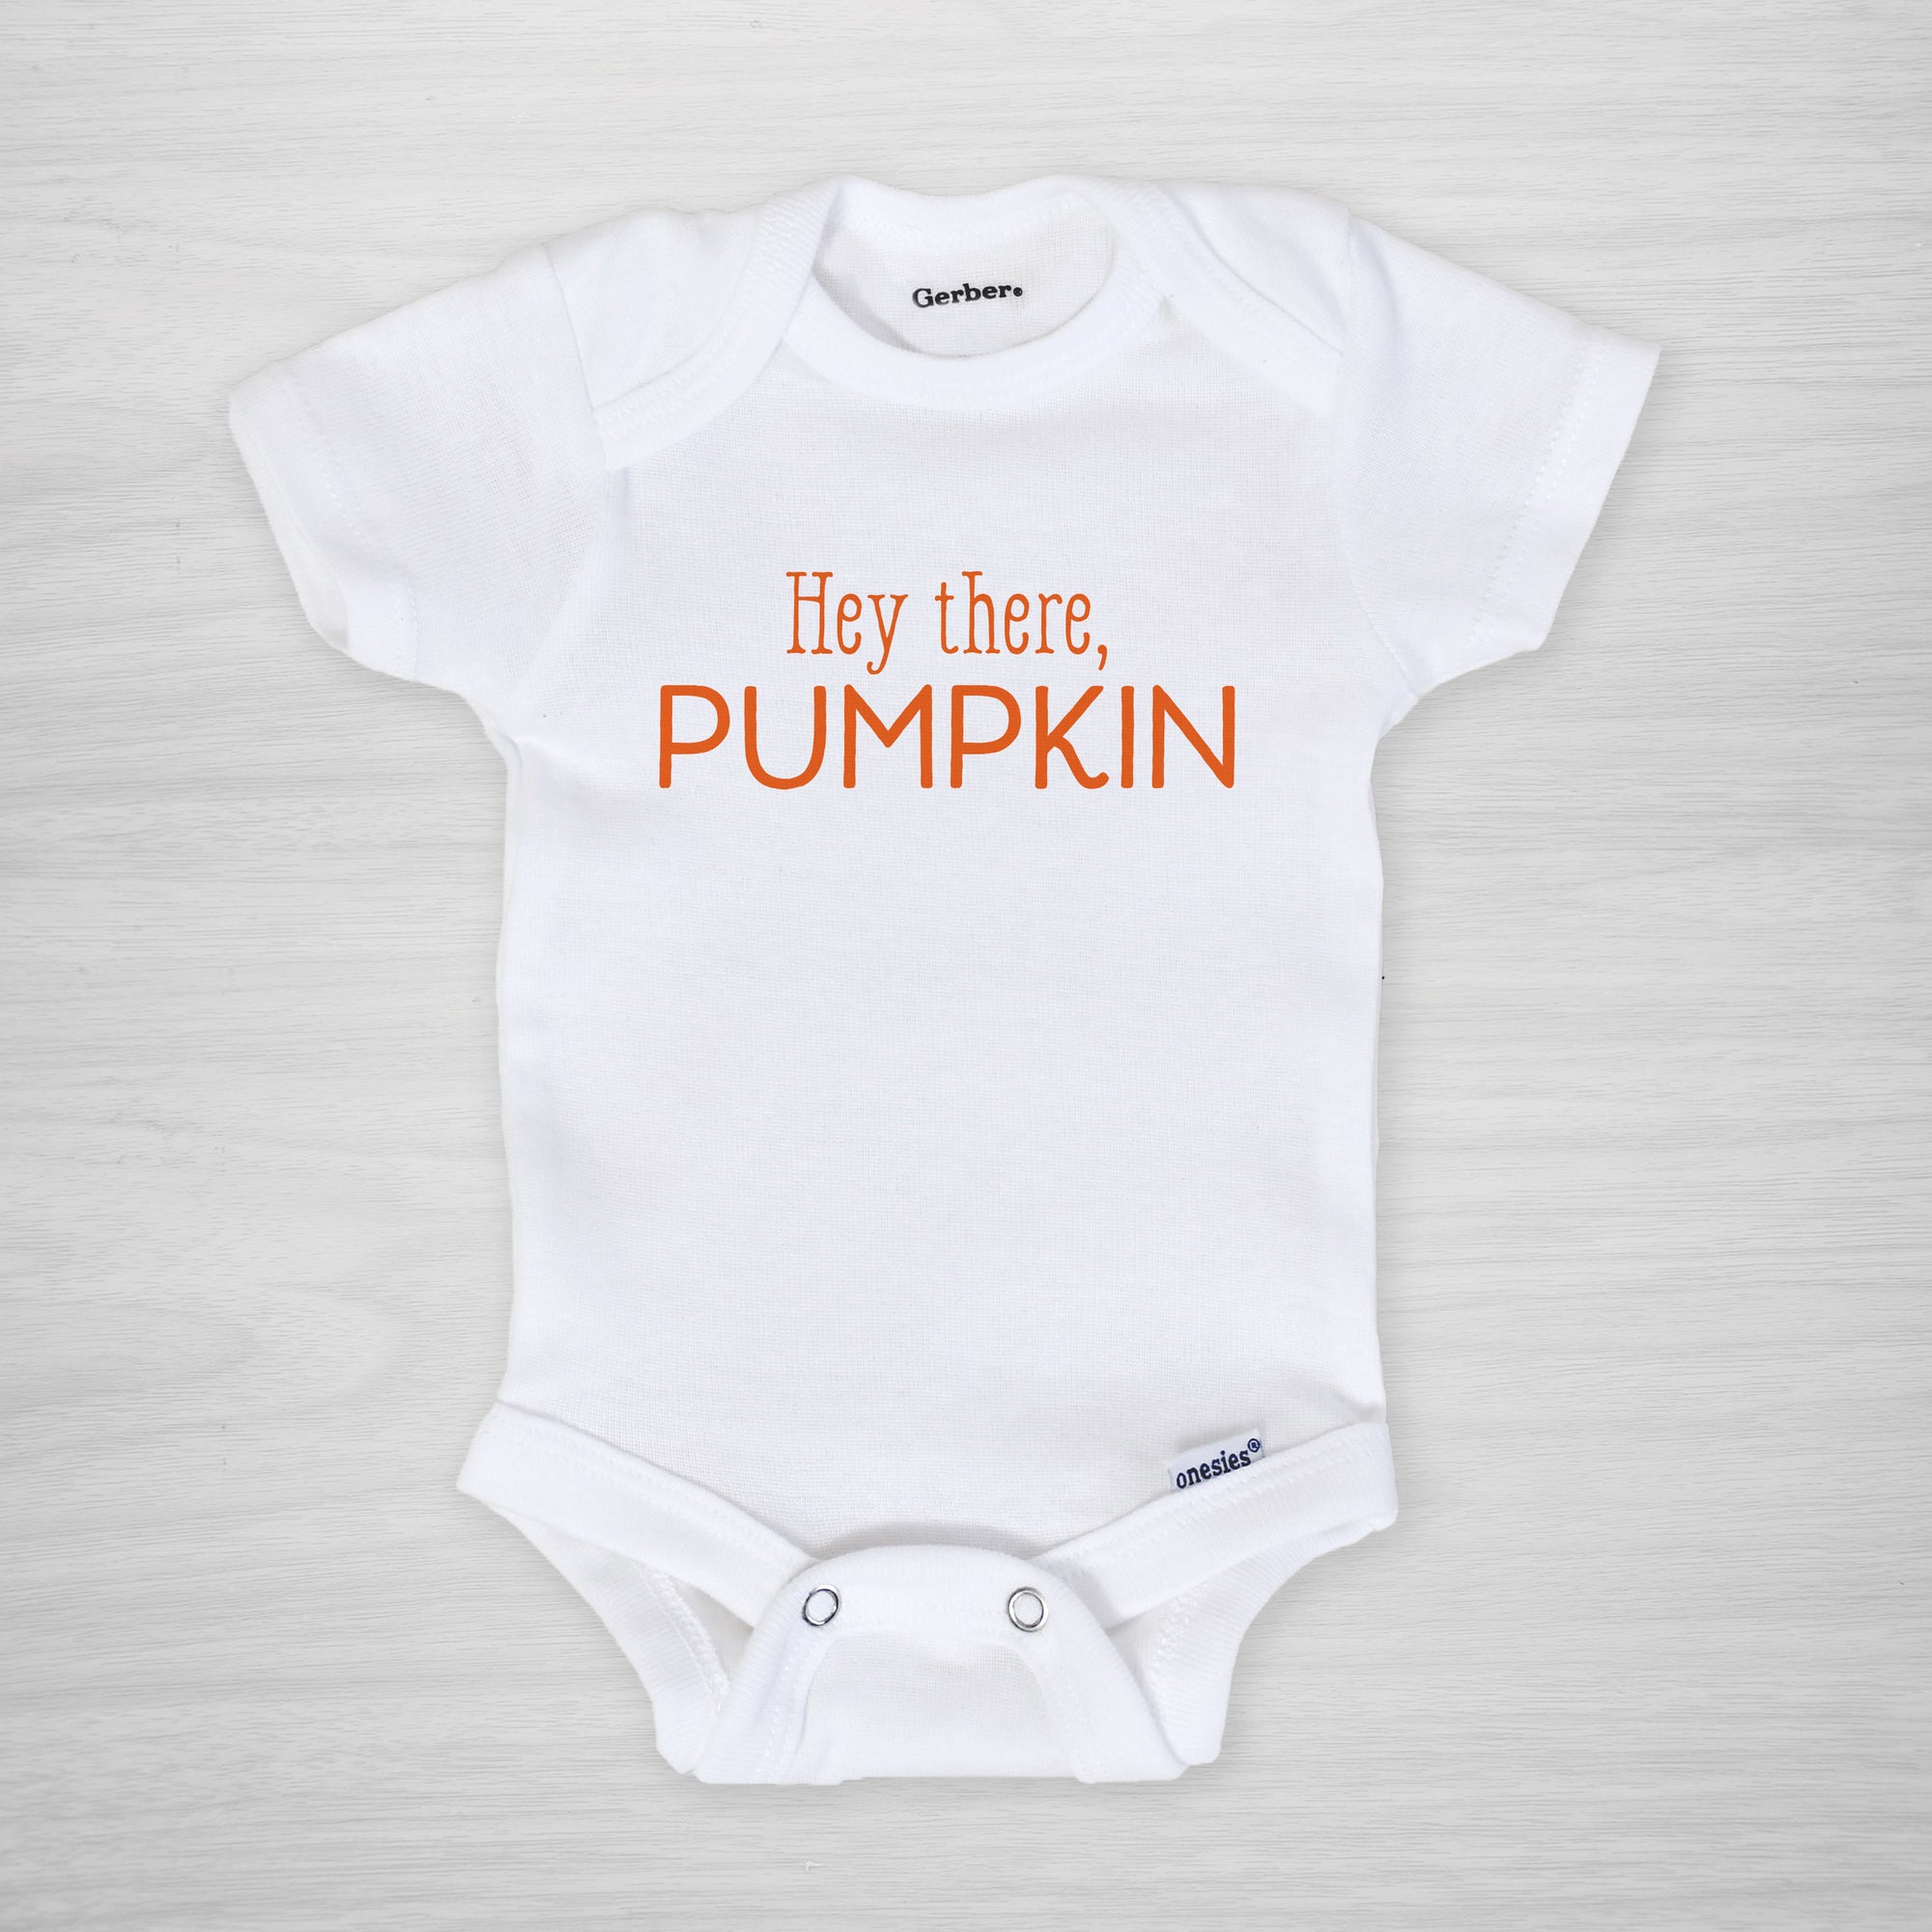 Hey There Pumpkin Gerber Onesie®, short sleeved, from Pipsy.com